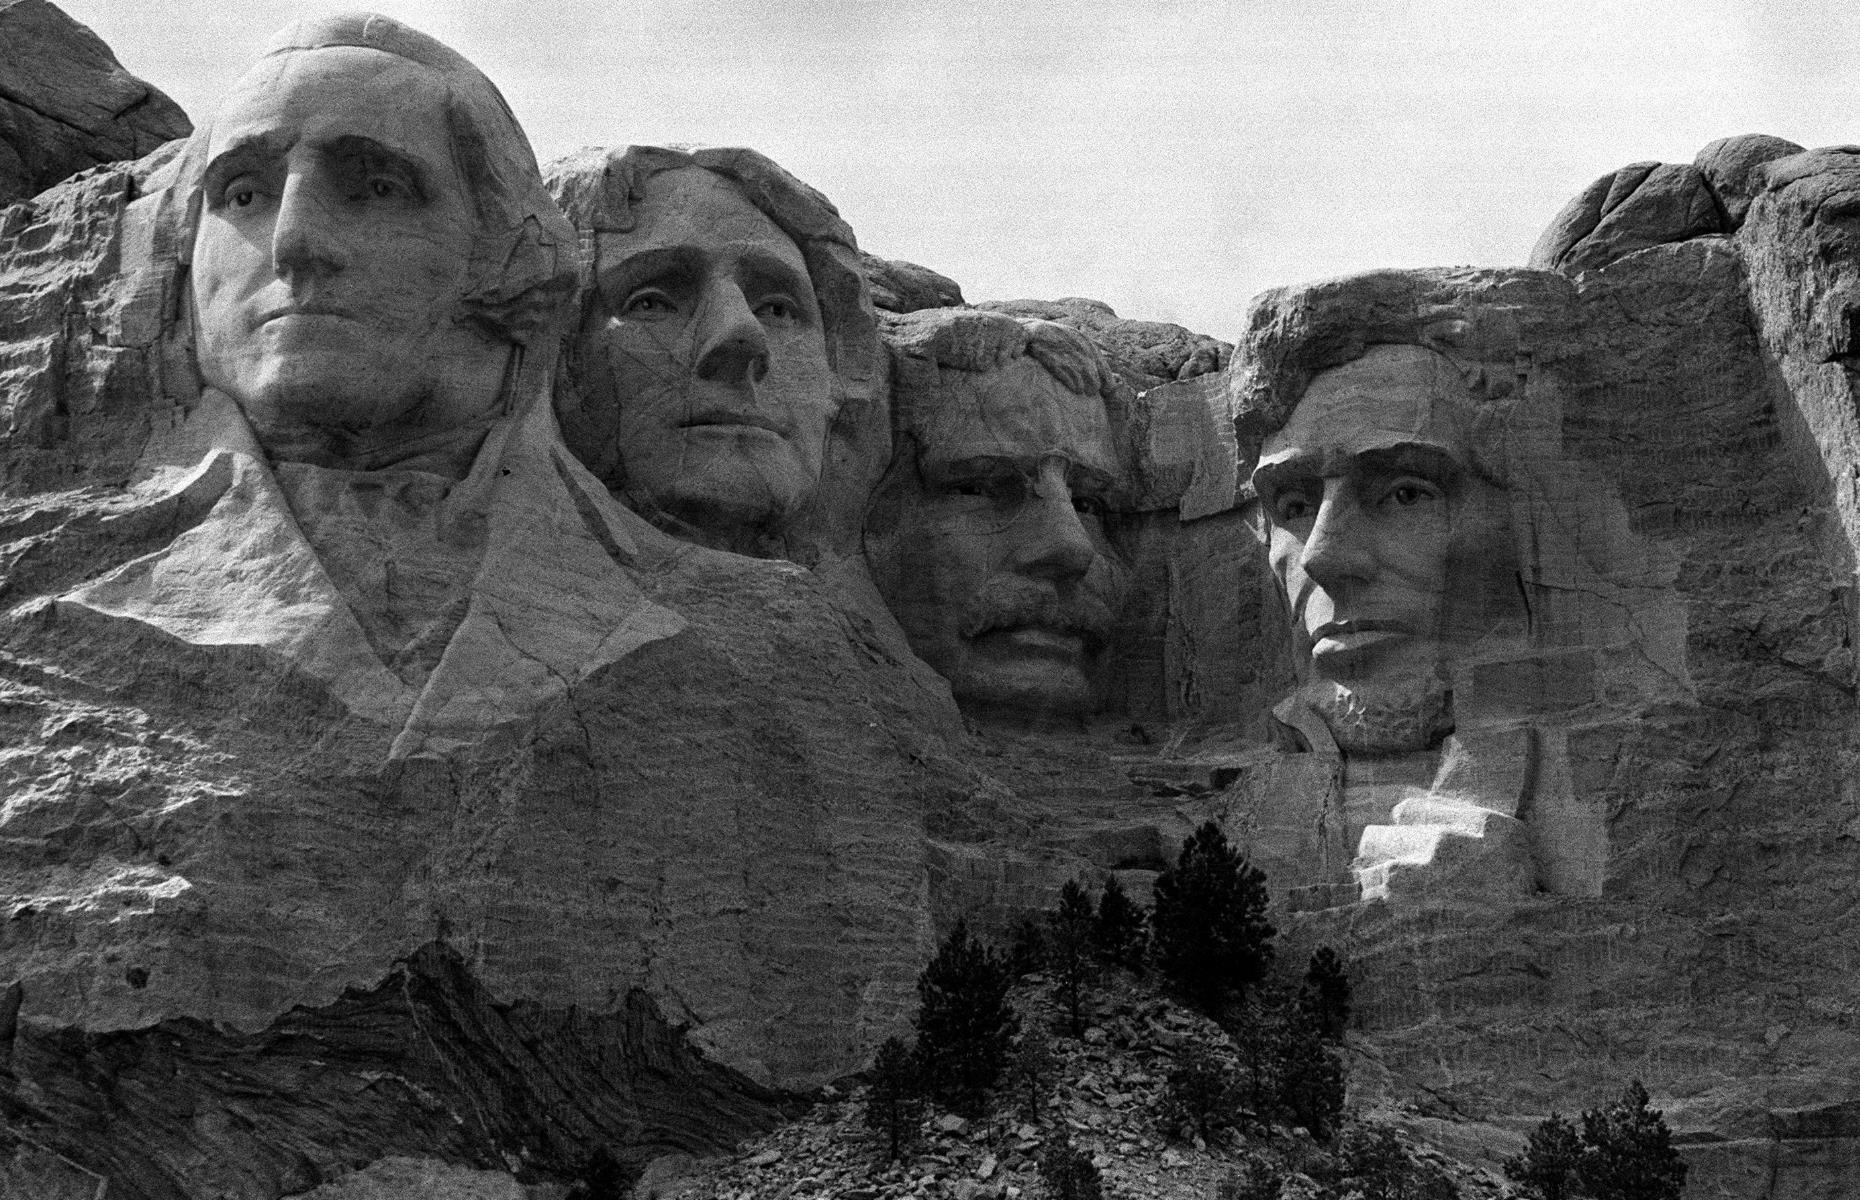 Conceived by historian Doane Robinson as a way to attract more tourism to the state of South Dakota, the mighty Mount Rushmore National Memorial was unveiled to the public in 1941. It worked: the landmark garnered close to half a million visitors in the first year alone. Carved into Mount Rushmore in the Black Hills of South Dakota, the sculpture features the faces of presidents George Washington, Thomas Jefferson, Theodore Roosevelt and Abraham Lincoln.